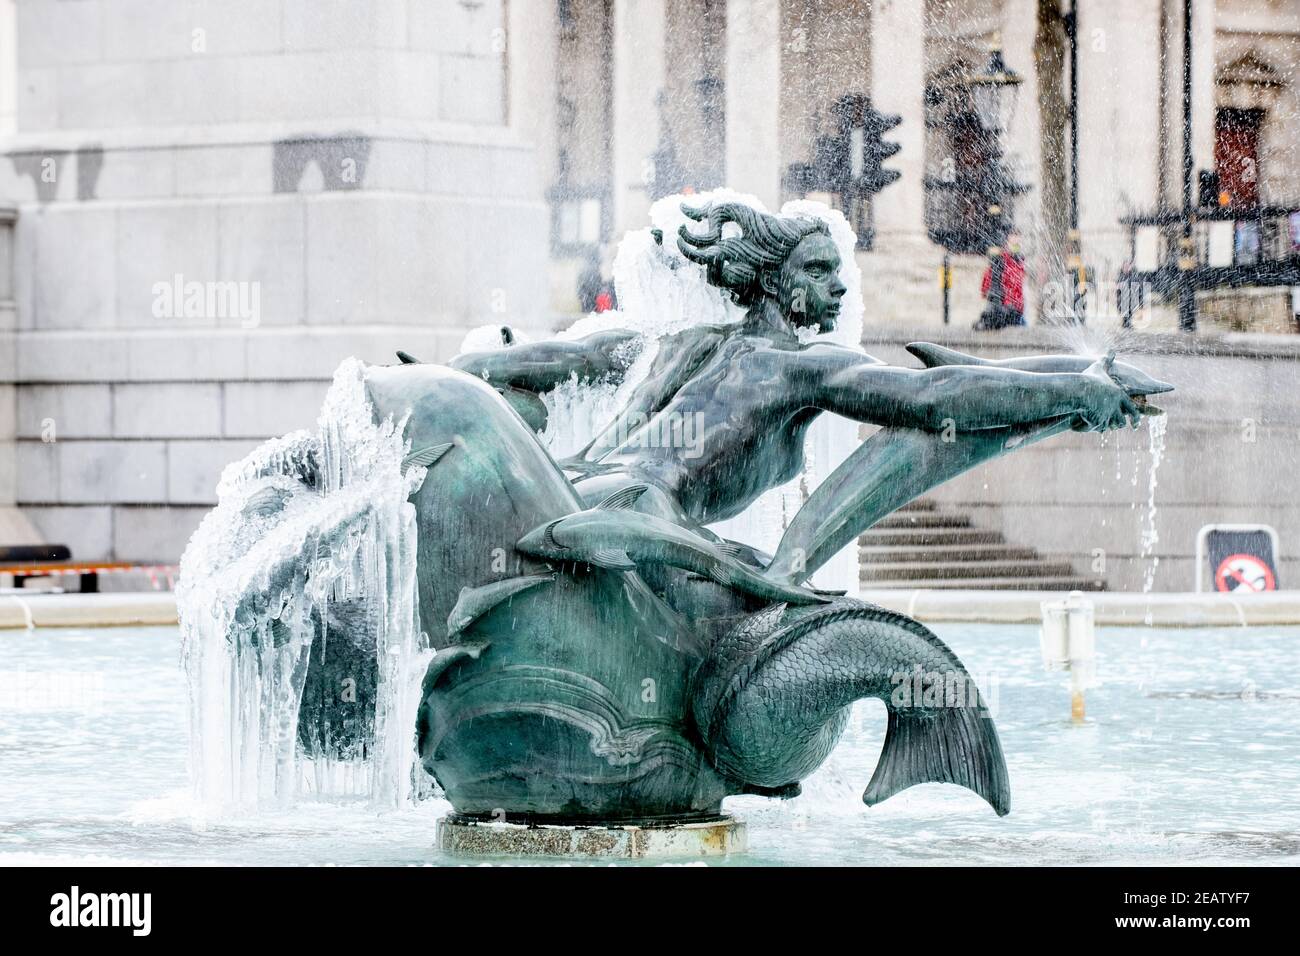 Frozen fountains in Trafalgar Square, London, England, during extreme low temperatures of Storm Darcy, Feb 2021, also called the Beast from the East. Stock Photo